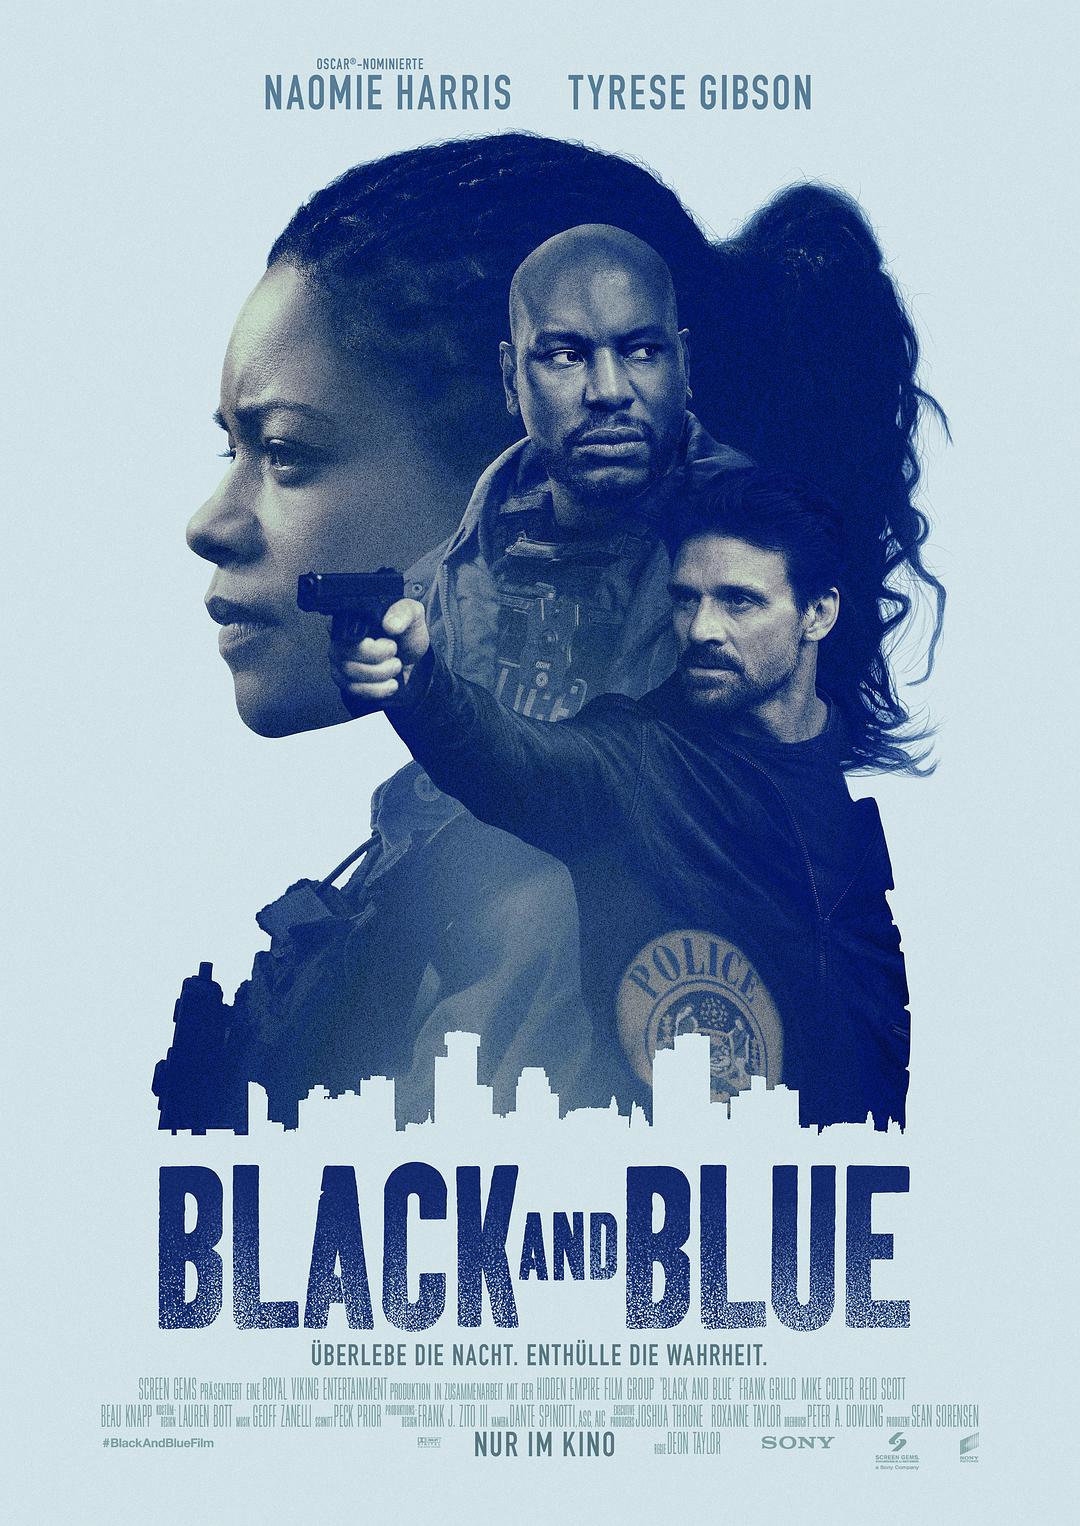  Black.and.Blue.2019.1080p.BluRay.x264-AAA 7.65GB-1.png